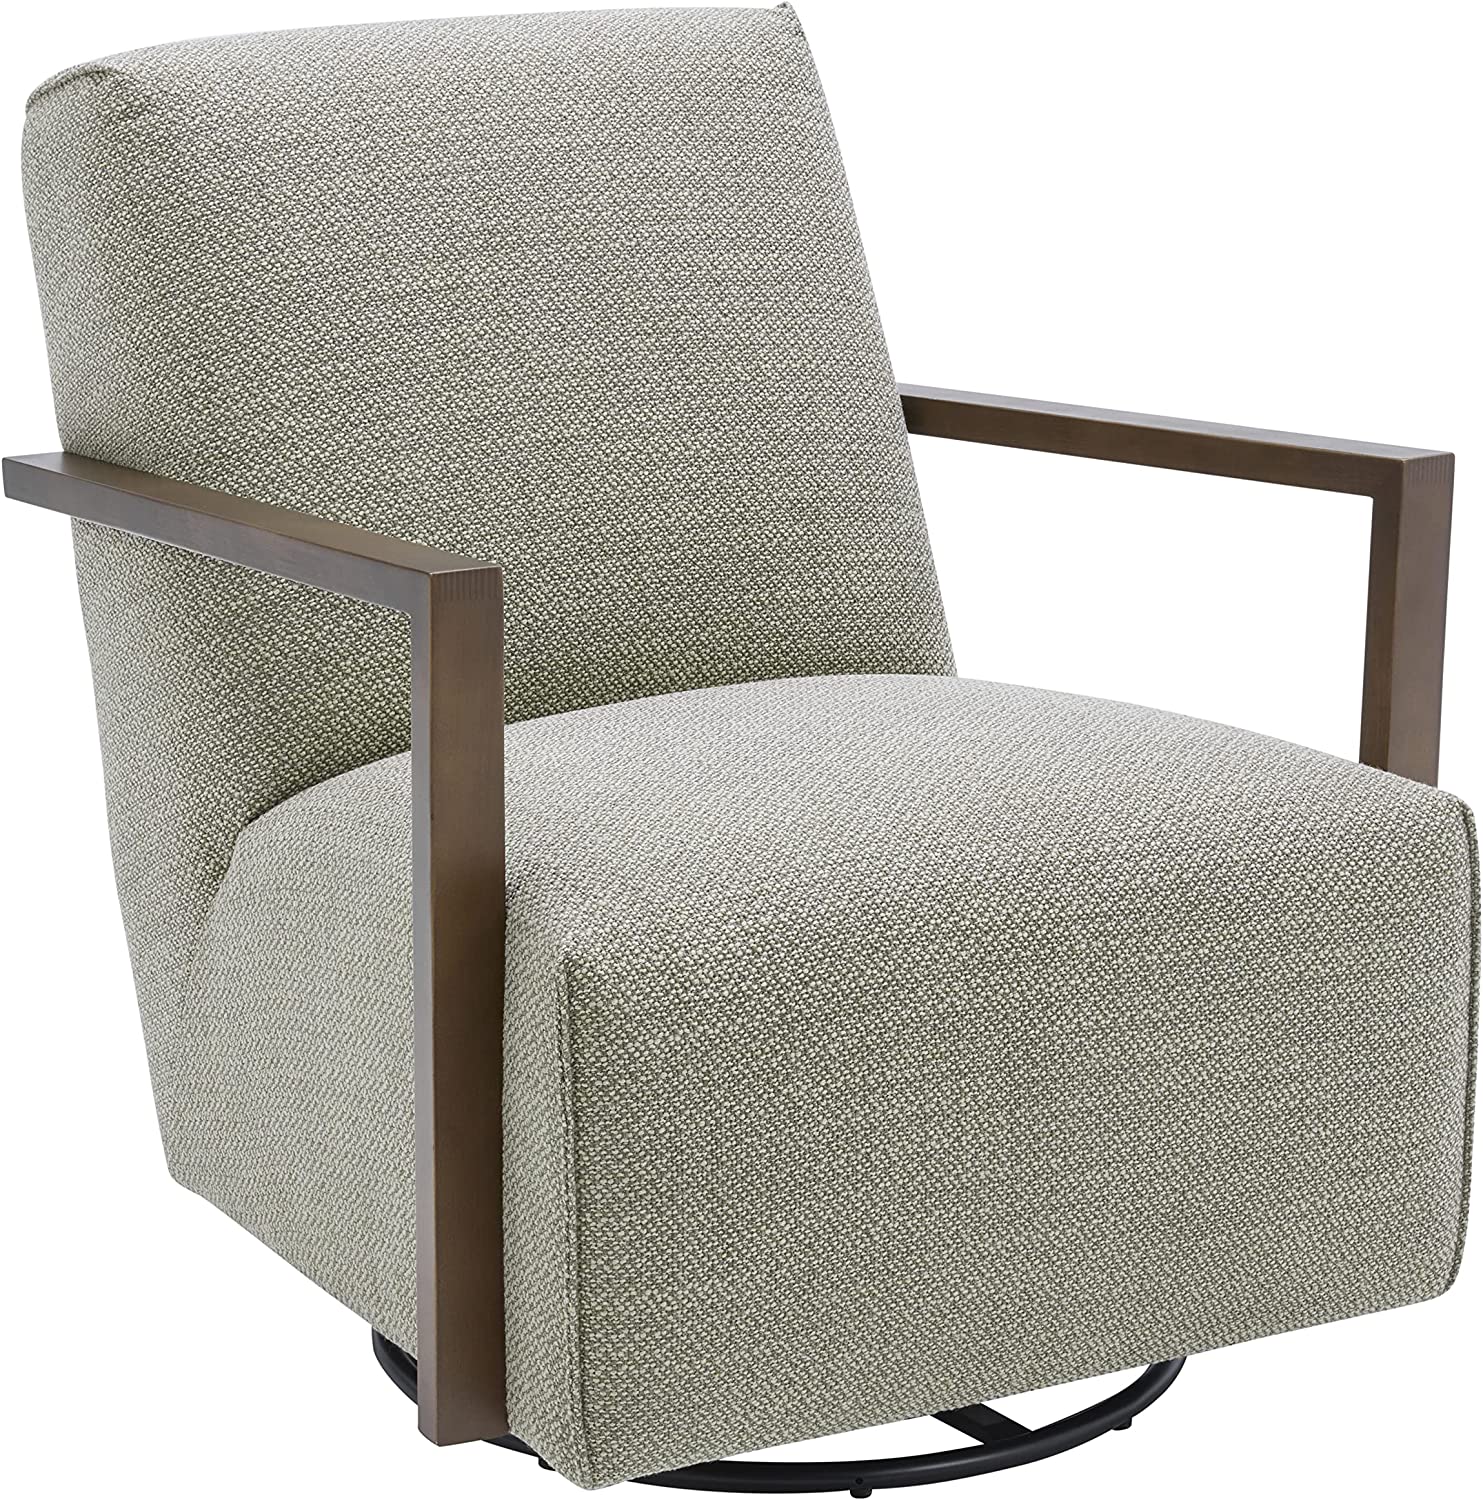 Rivet Contemporary Upholstered Glider Accent Chair, 30.3"W, Pumice - $375